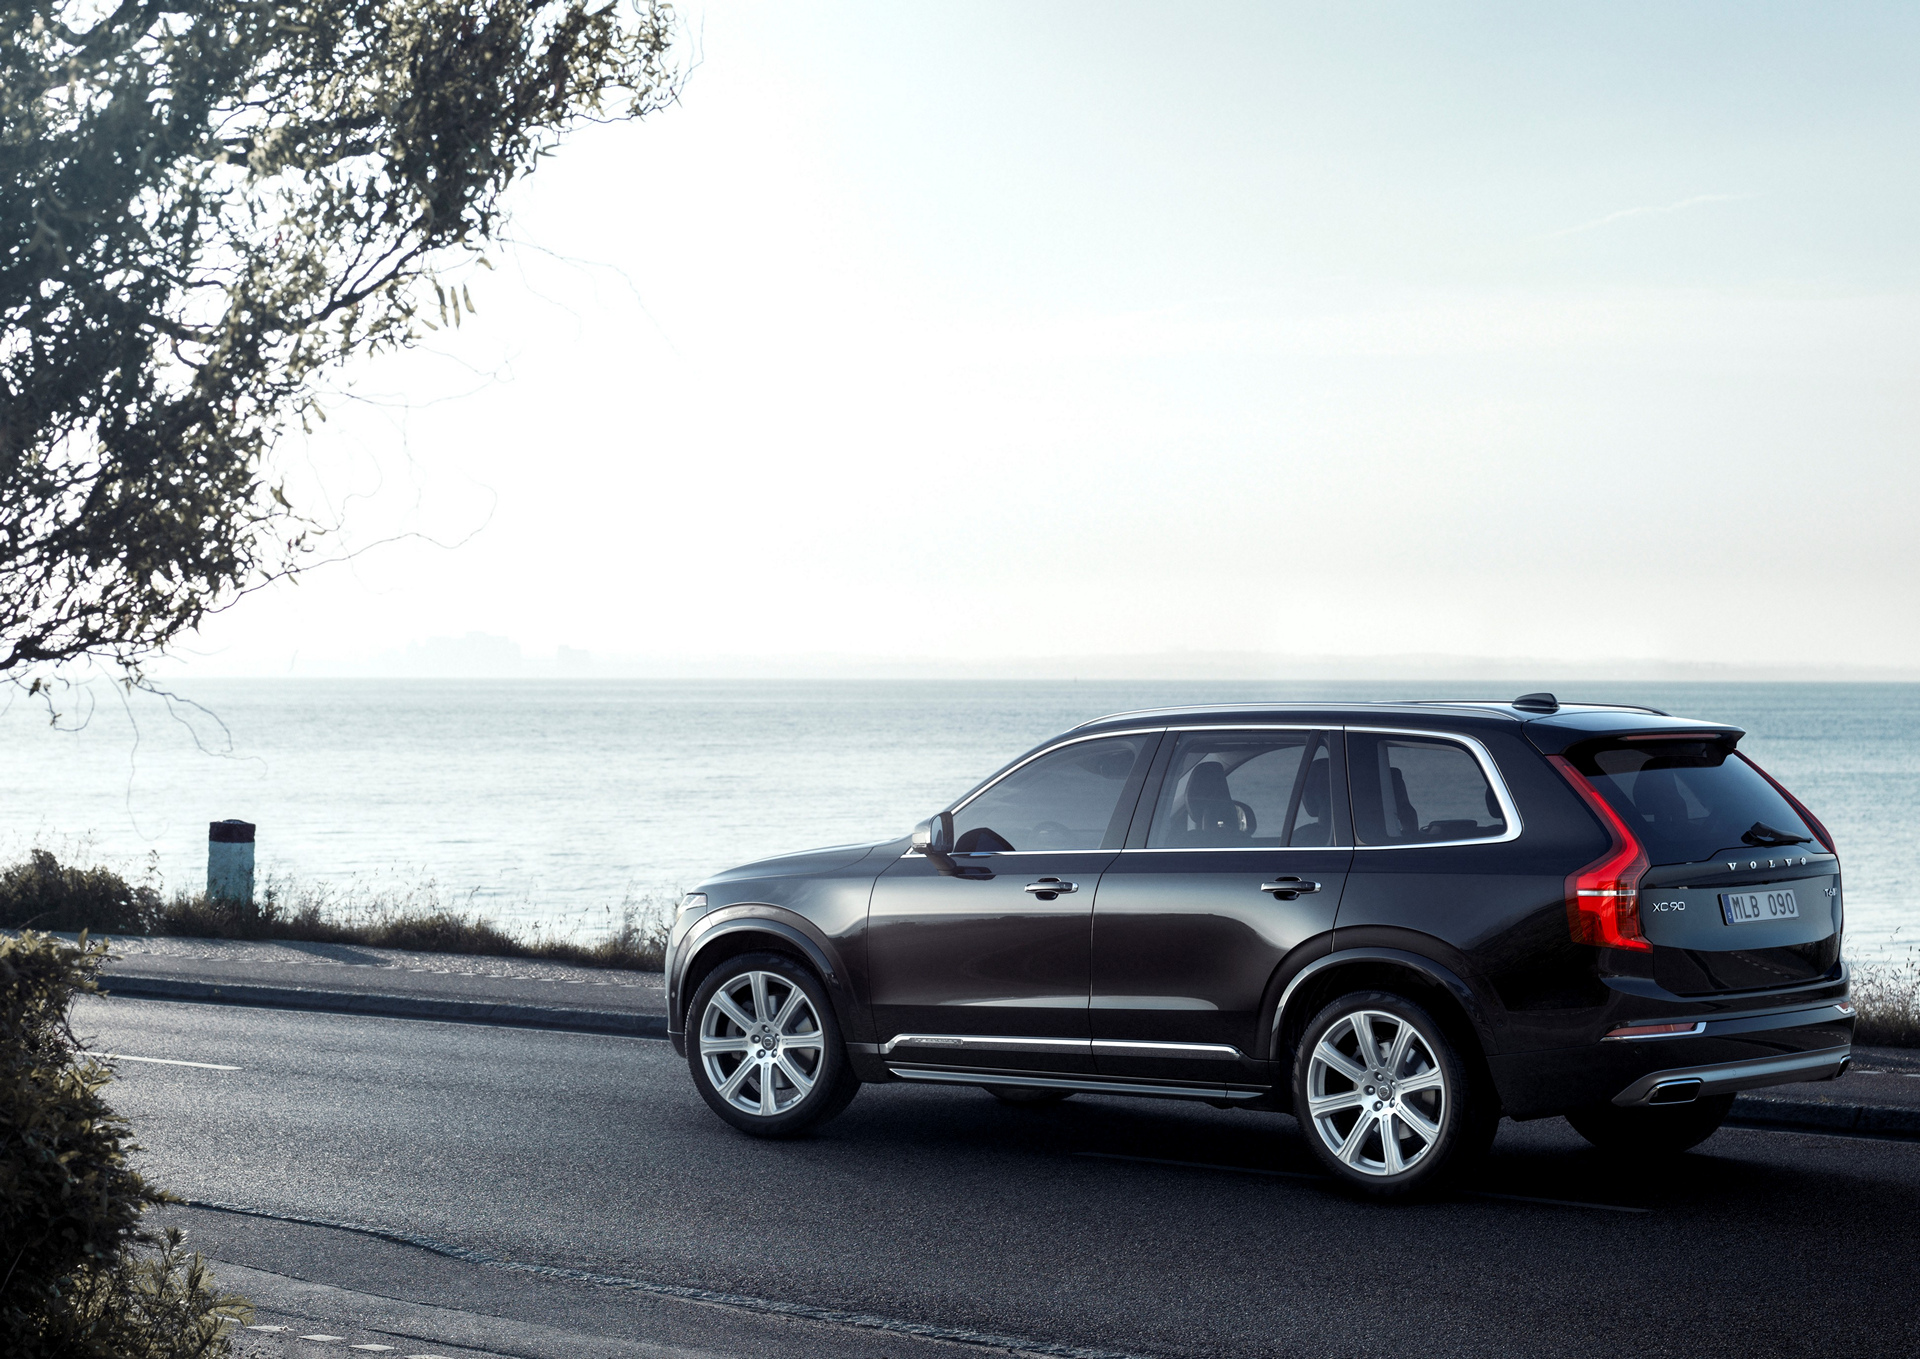  Volvo XC90 © Zhejiang Geely Holding Group Co., Ltd